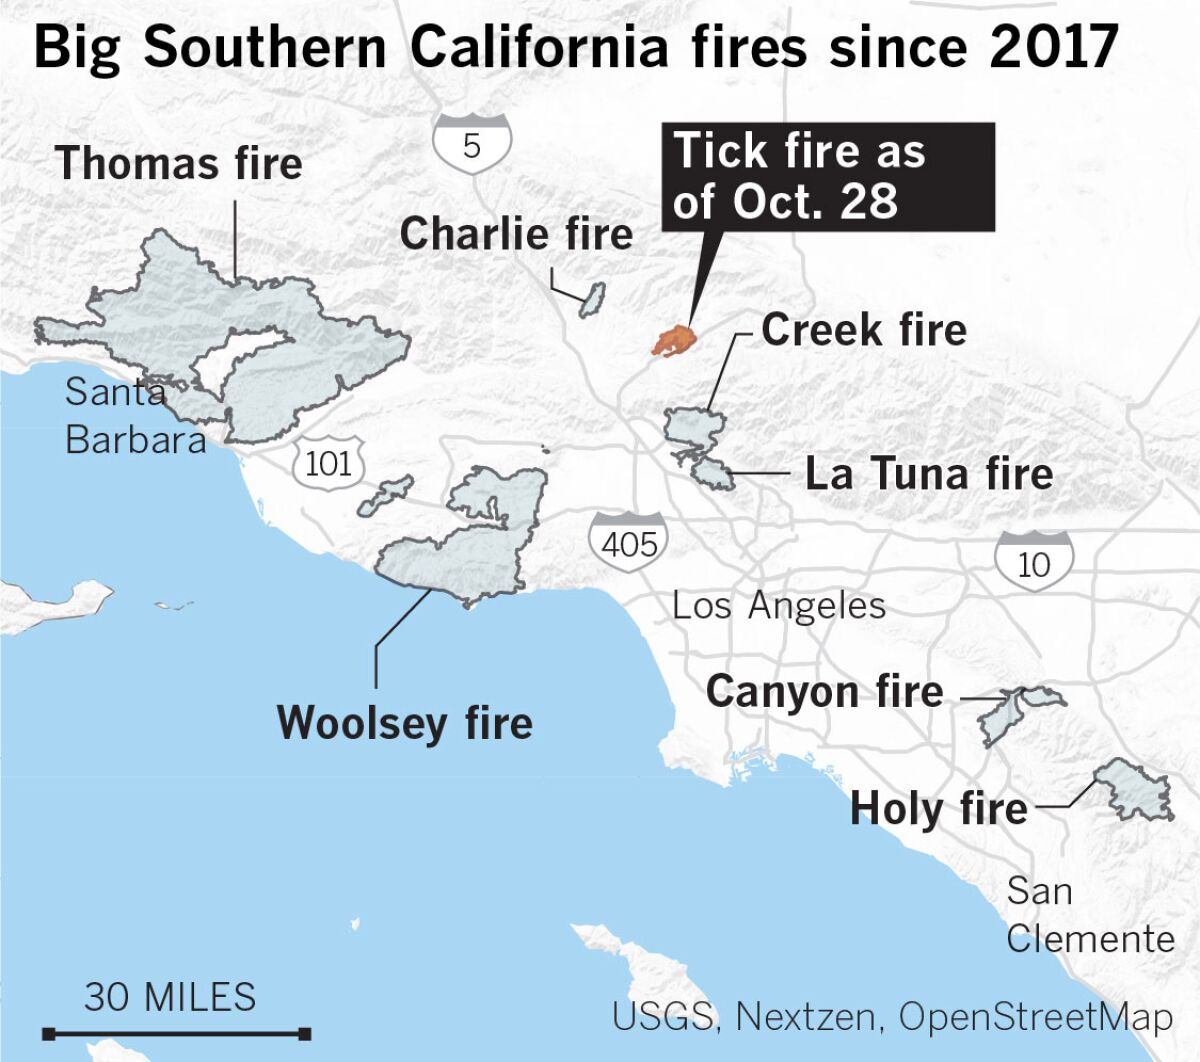 Big Southern California fires since 2017